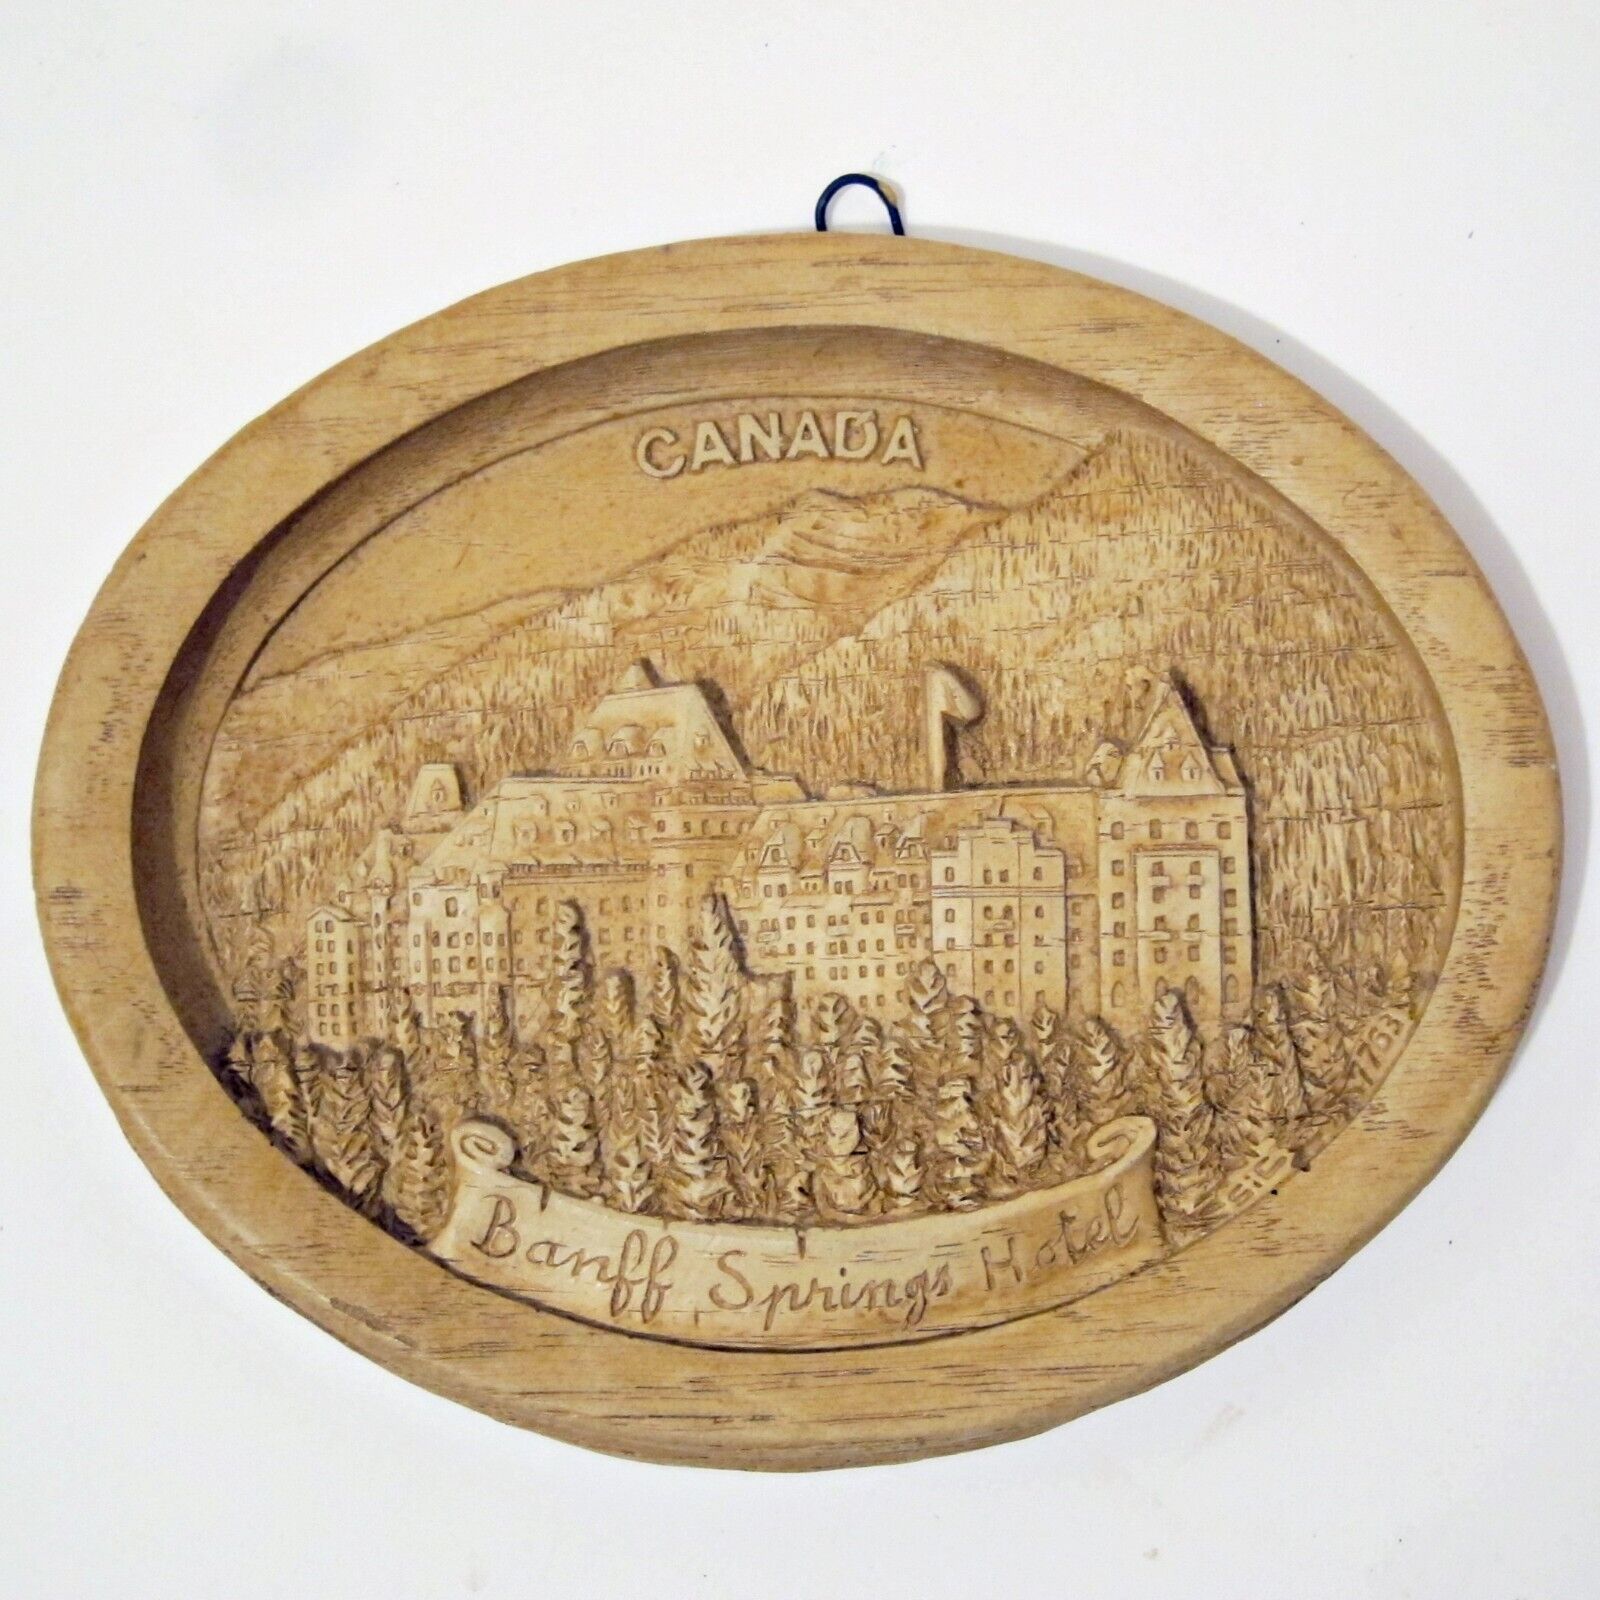 BANFF SPRINGS HOTEL WALL PLAQUE - Wooden Relief Carved - Vintage